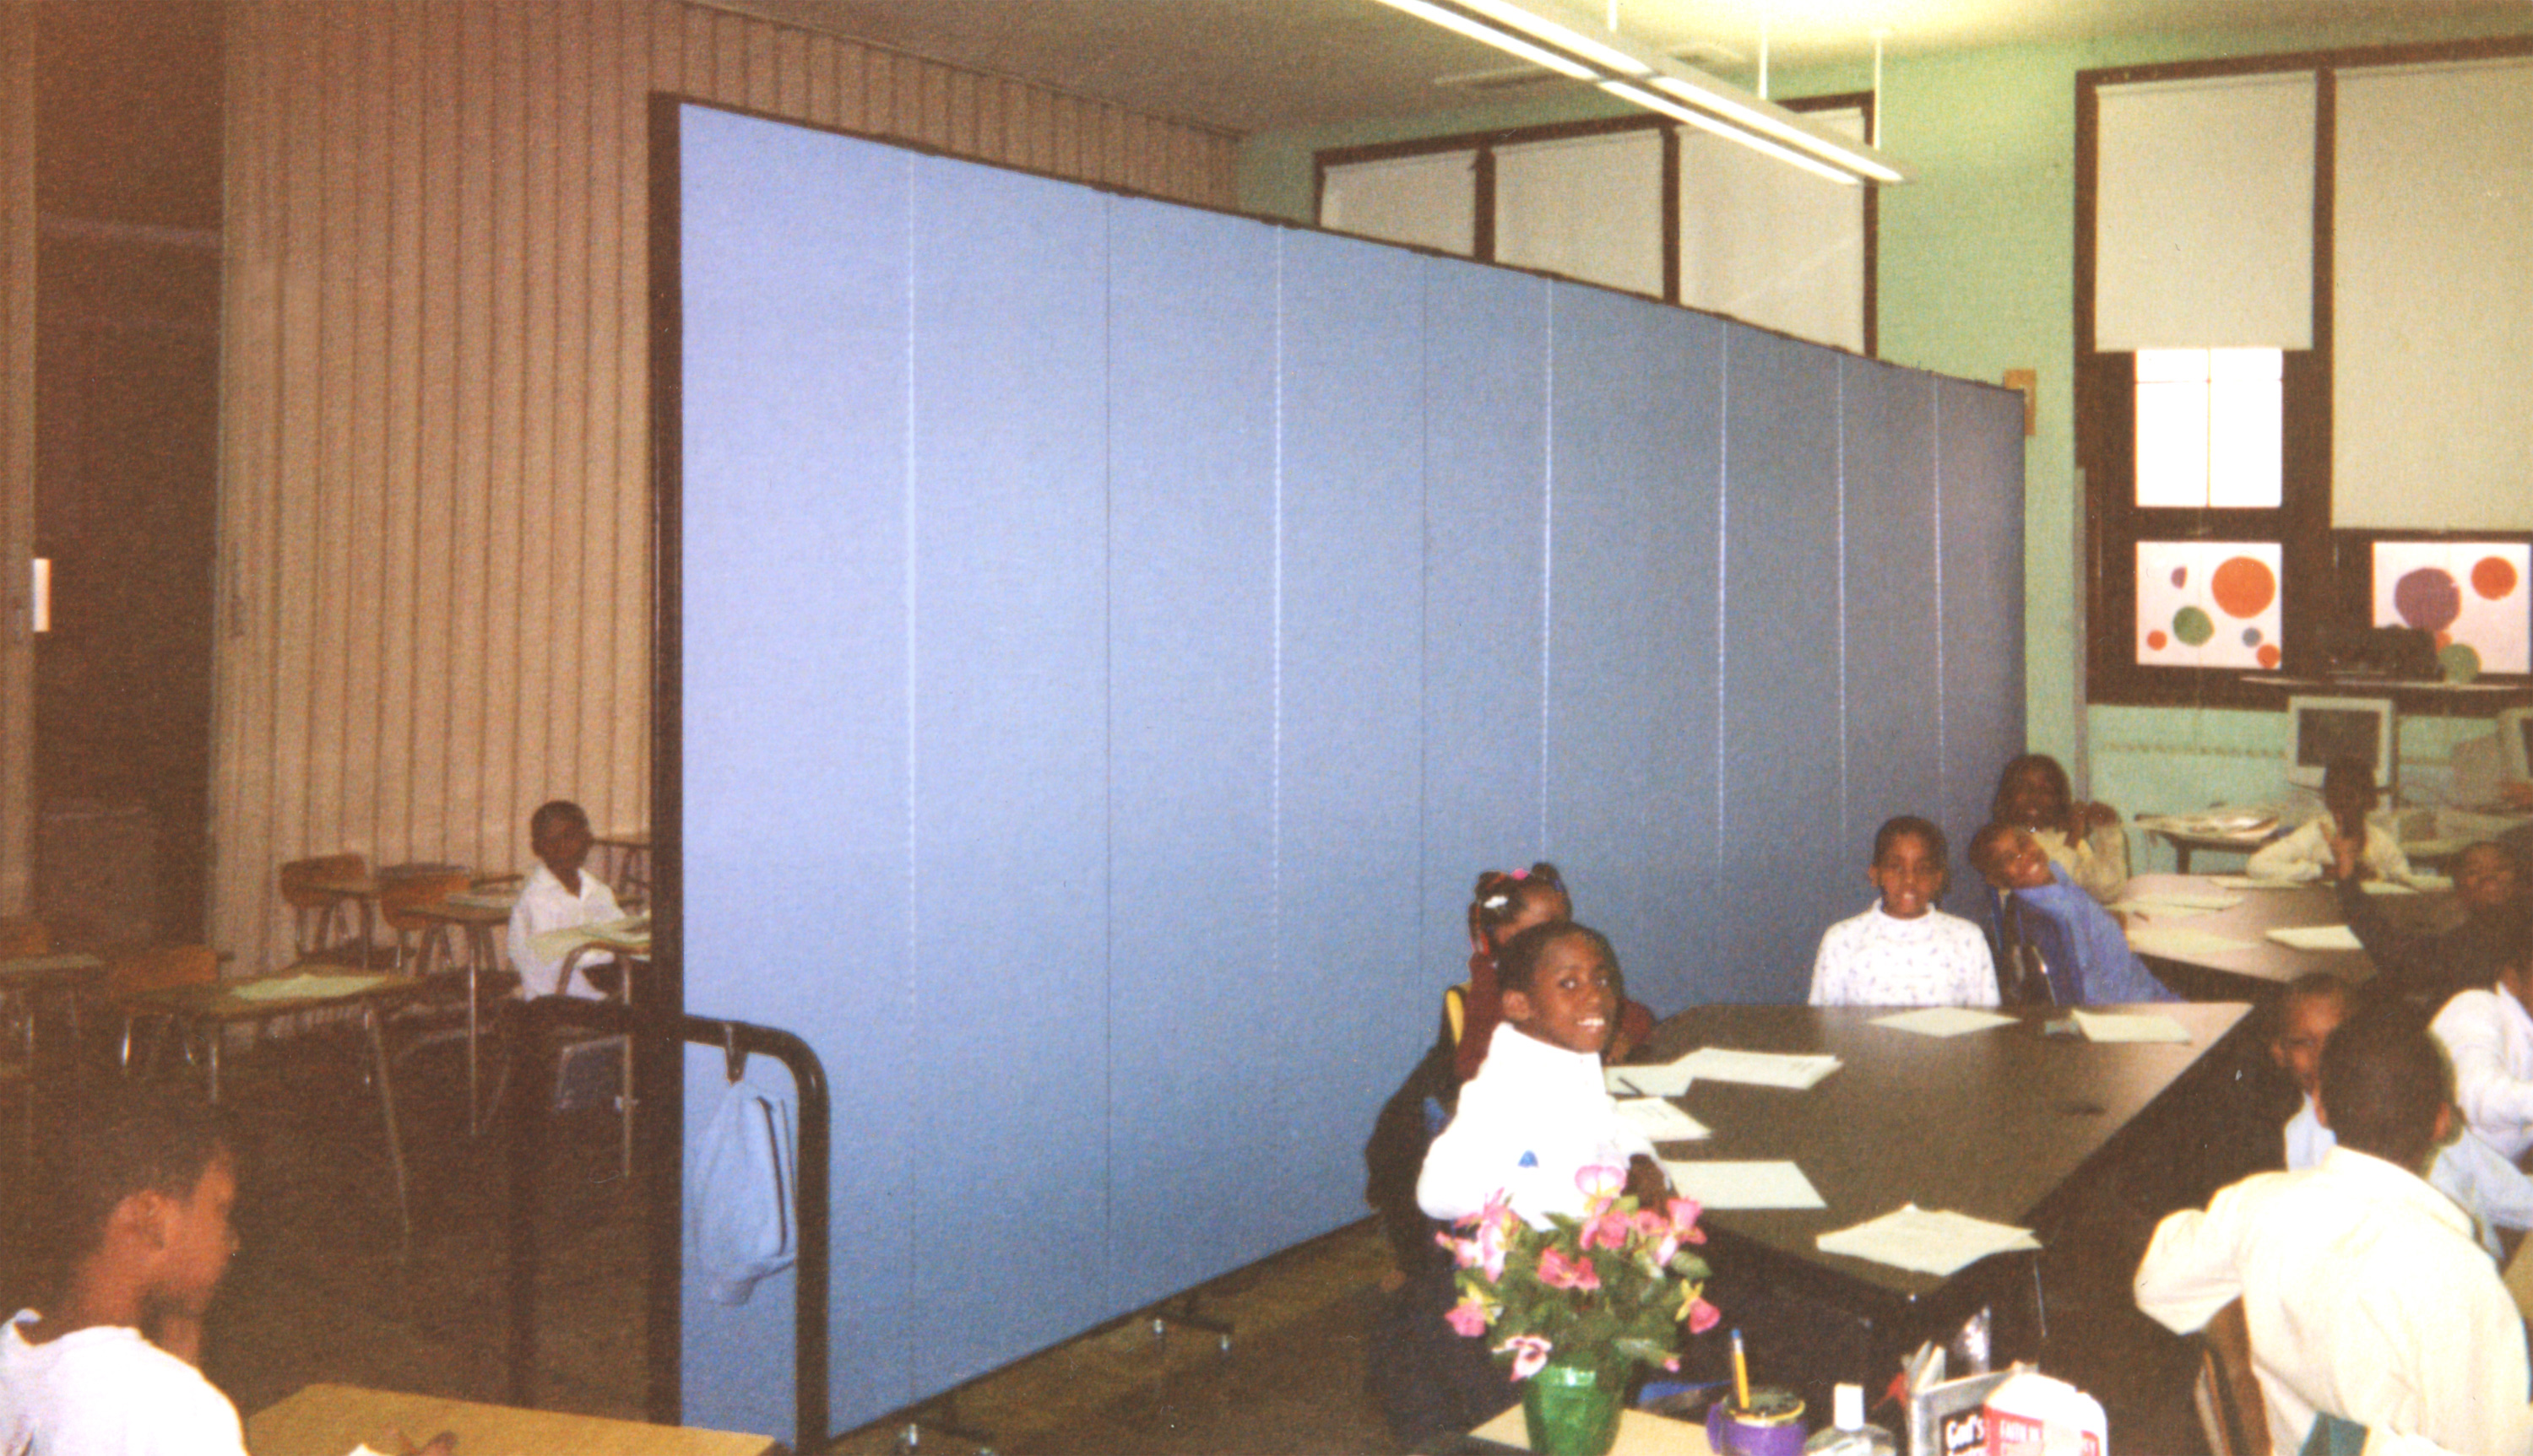 Acoustical Wallmount dividers help make the best use of space in overcrowded schools